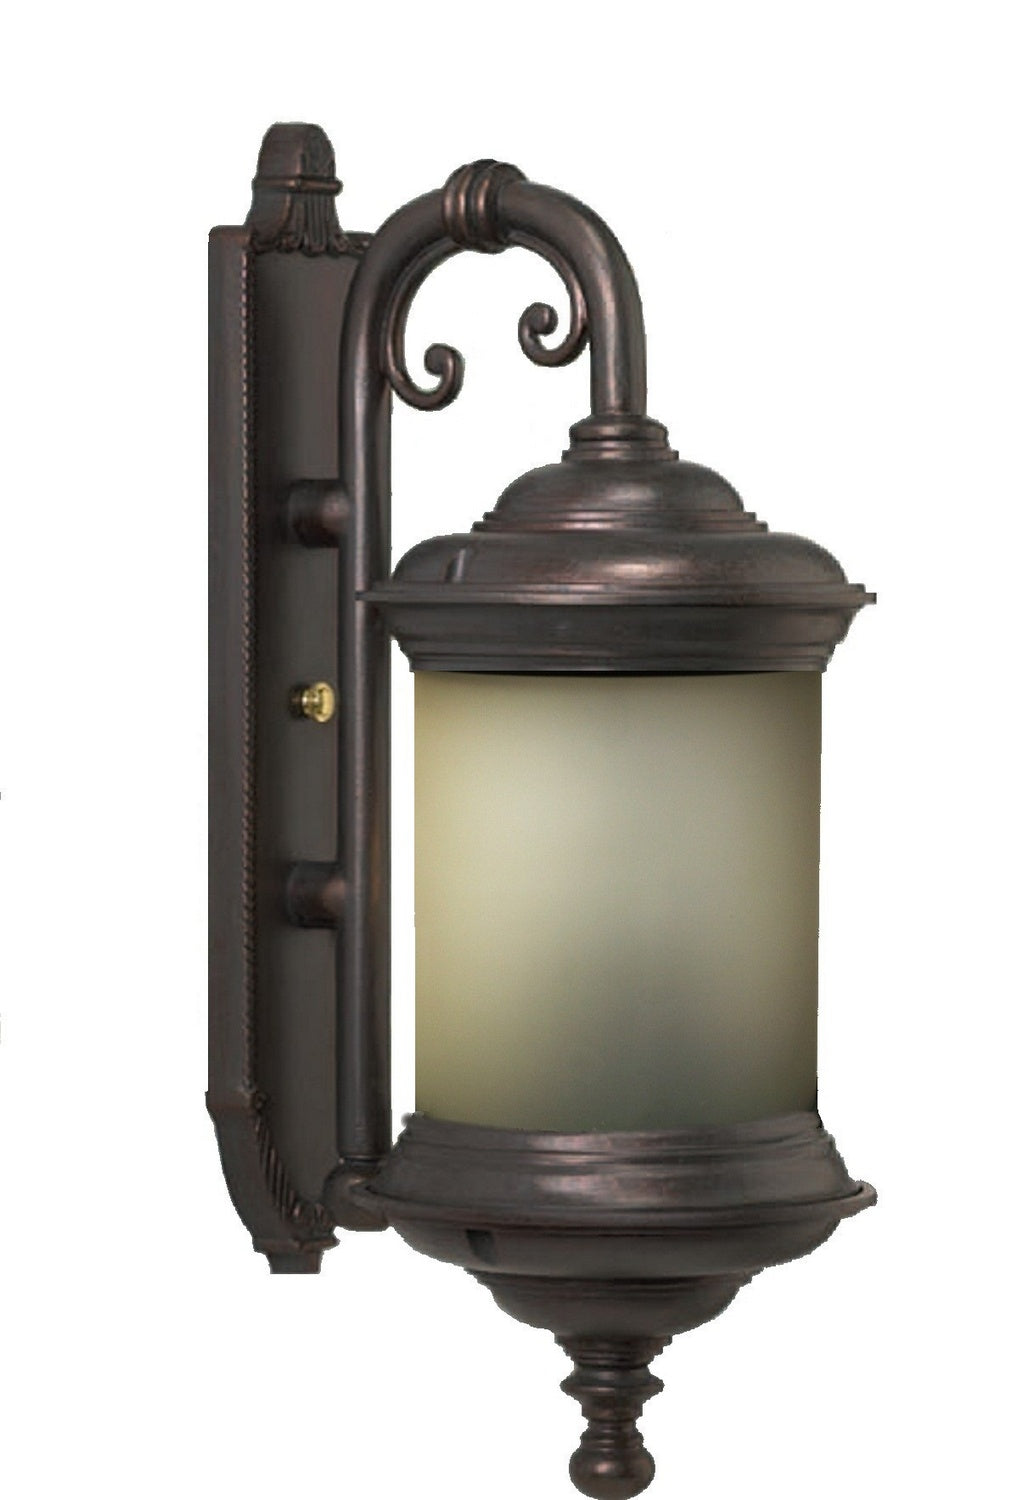 Melissa Lighting - TC409098 - Outdoor Wall Mount - Tuscany Collection